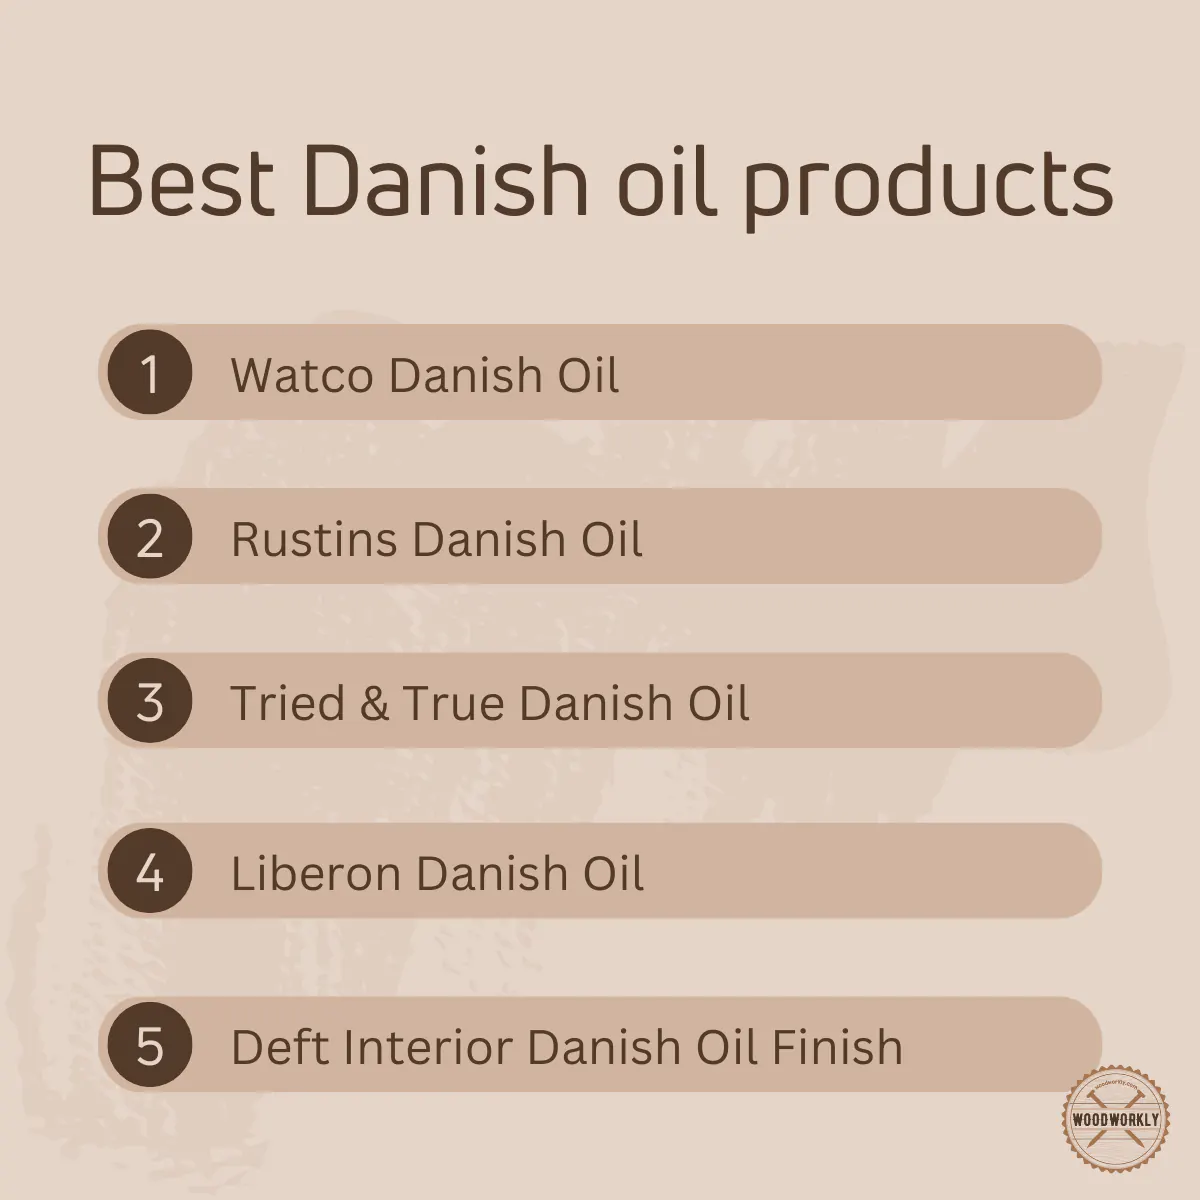 Best Danish oil products